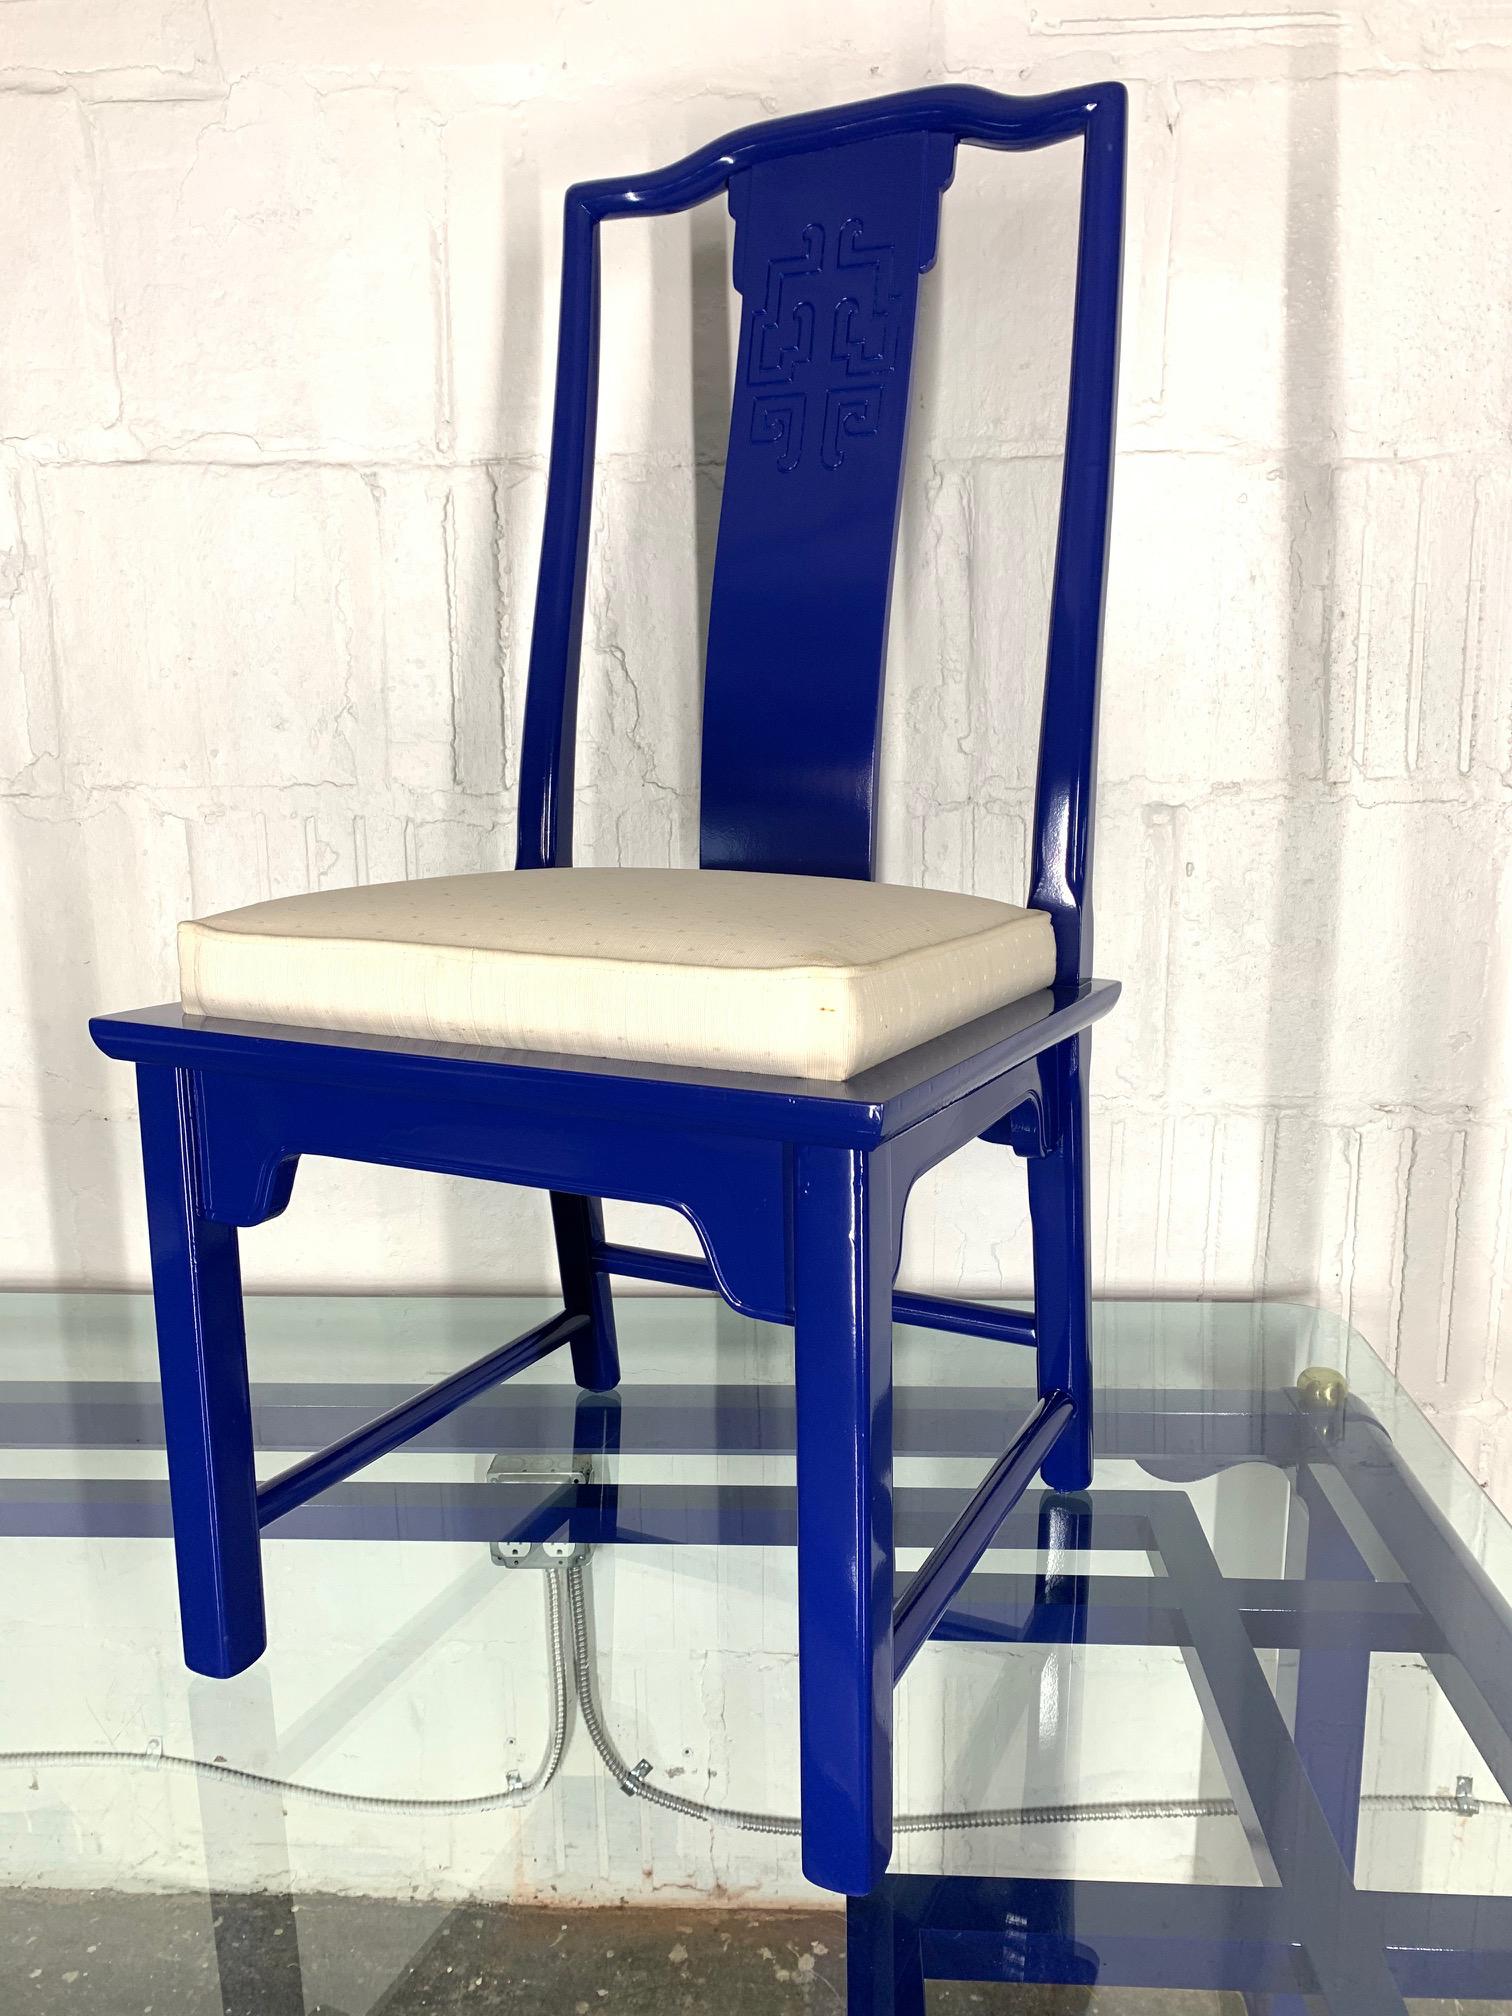 Set of 6 dining chairs by Century Furniture. Part of the Chin Hua collection by Raymond Sabota. Asian chinoiserie style lacquered in high gloss blue. Original seat upholstery has some slight discolorations.
Side chairs measure 19